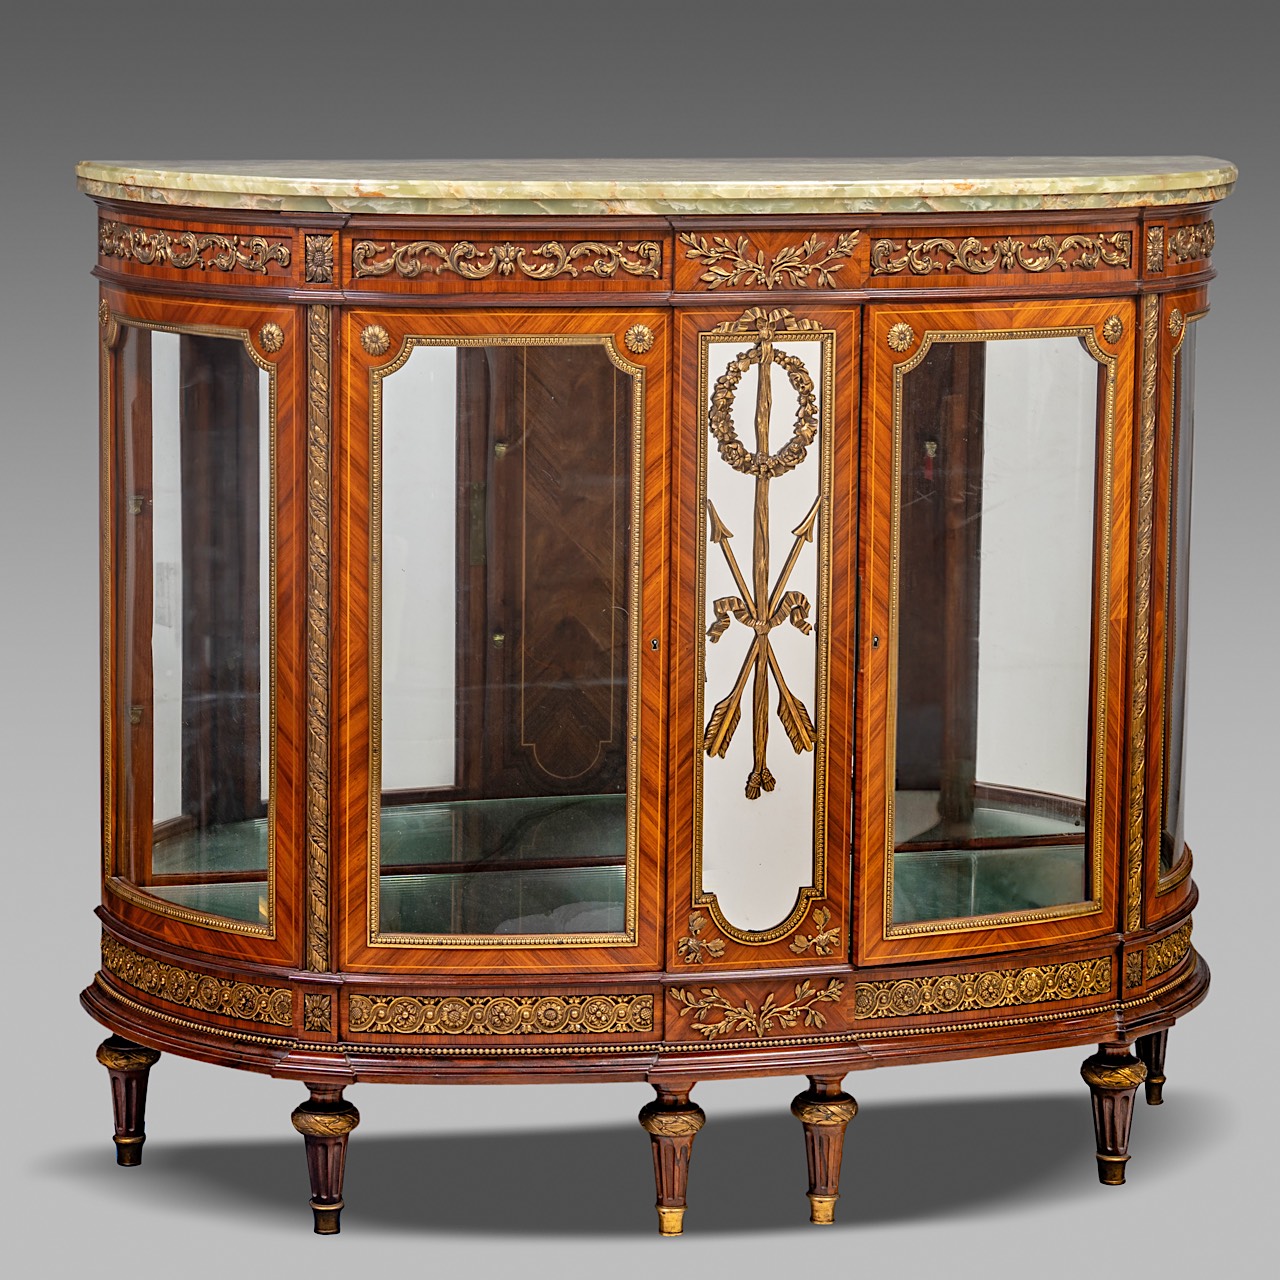 A Louis XVI-style display cabinet with a marble top and a mirror interior, H 110,5 cm - W 129 cm - D